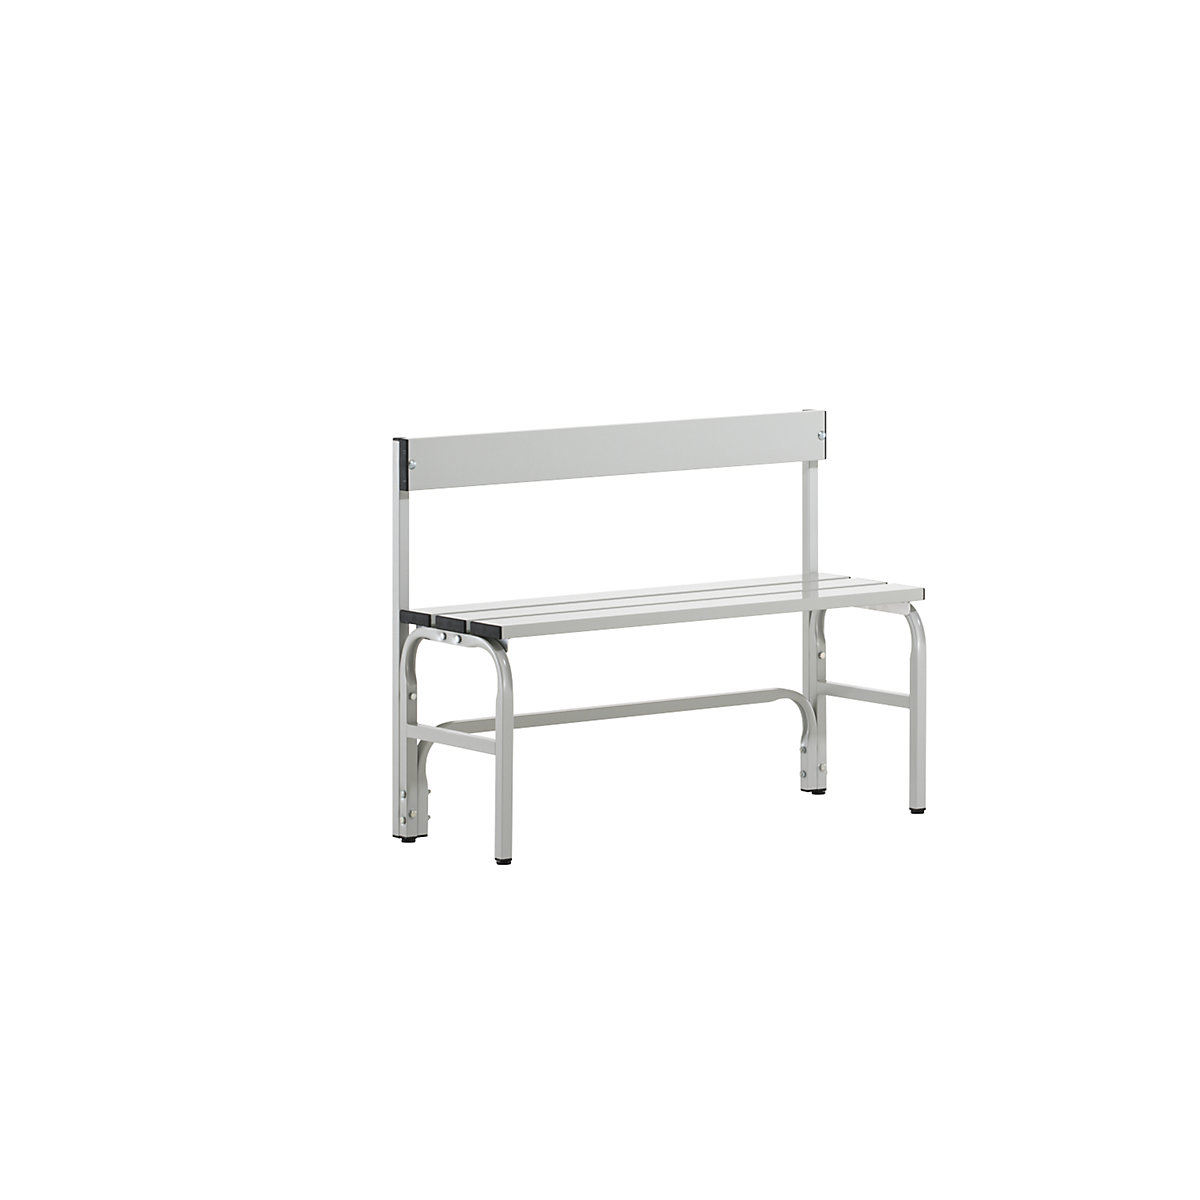 Half height cloakroom bench with back rest, single-sided - Sypro